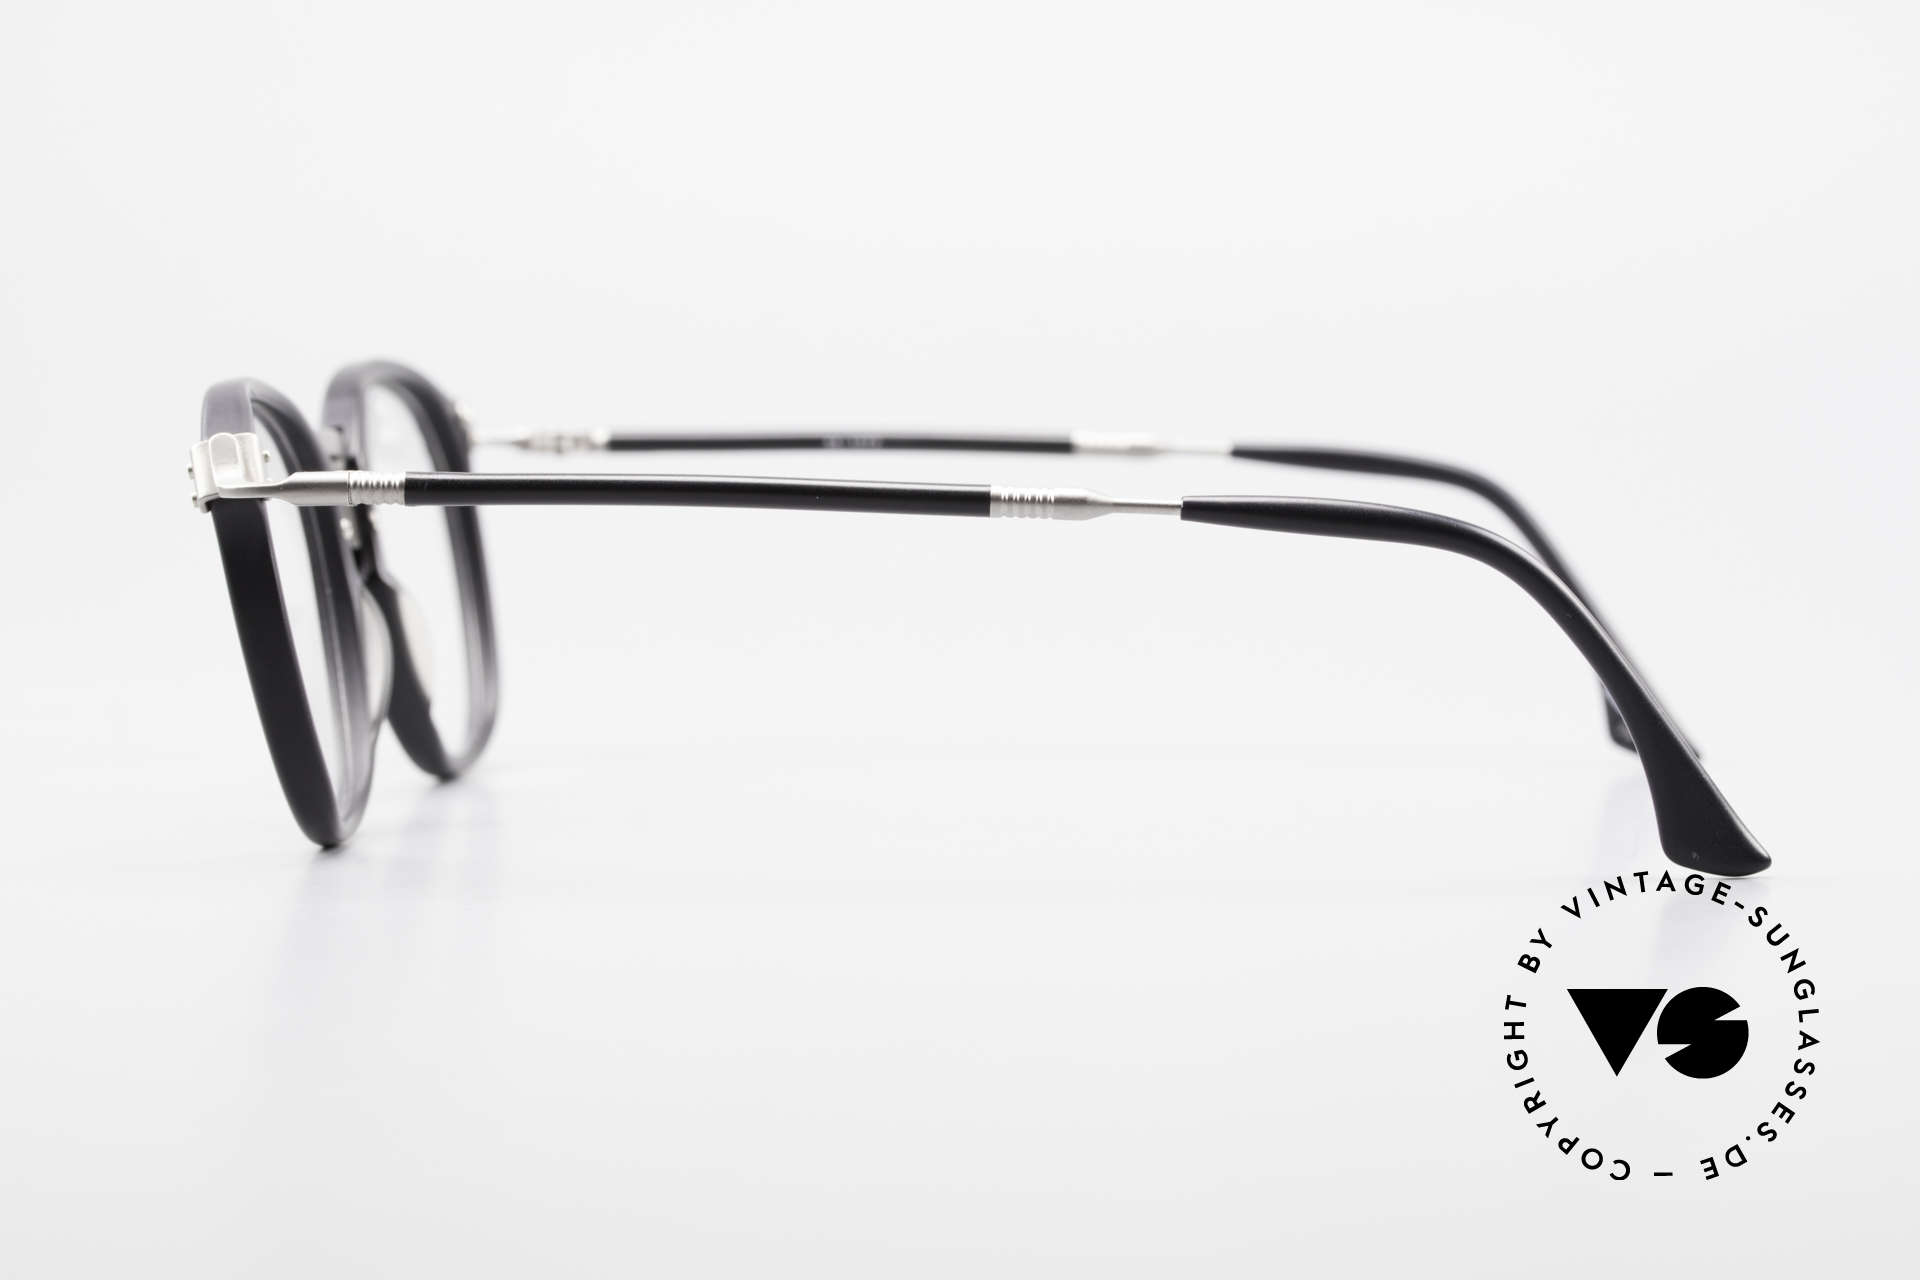 Jean Paul Gaultier 55-1272 Old Vintage Glasses No Retro, unworn (like all our rare vintage J.P. Gaultier frames), Made for Men and Women